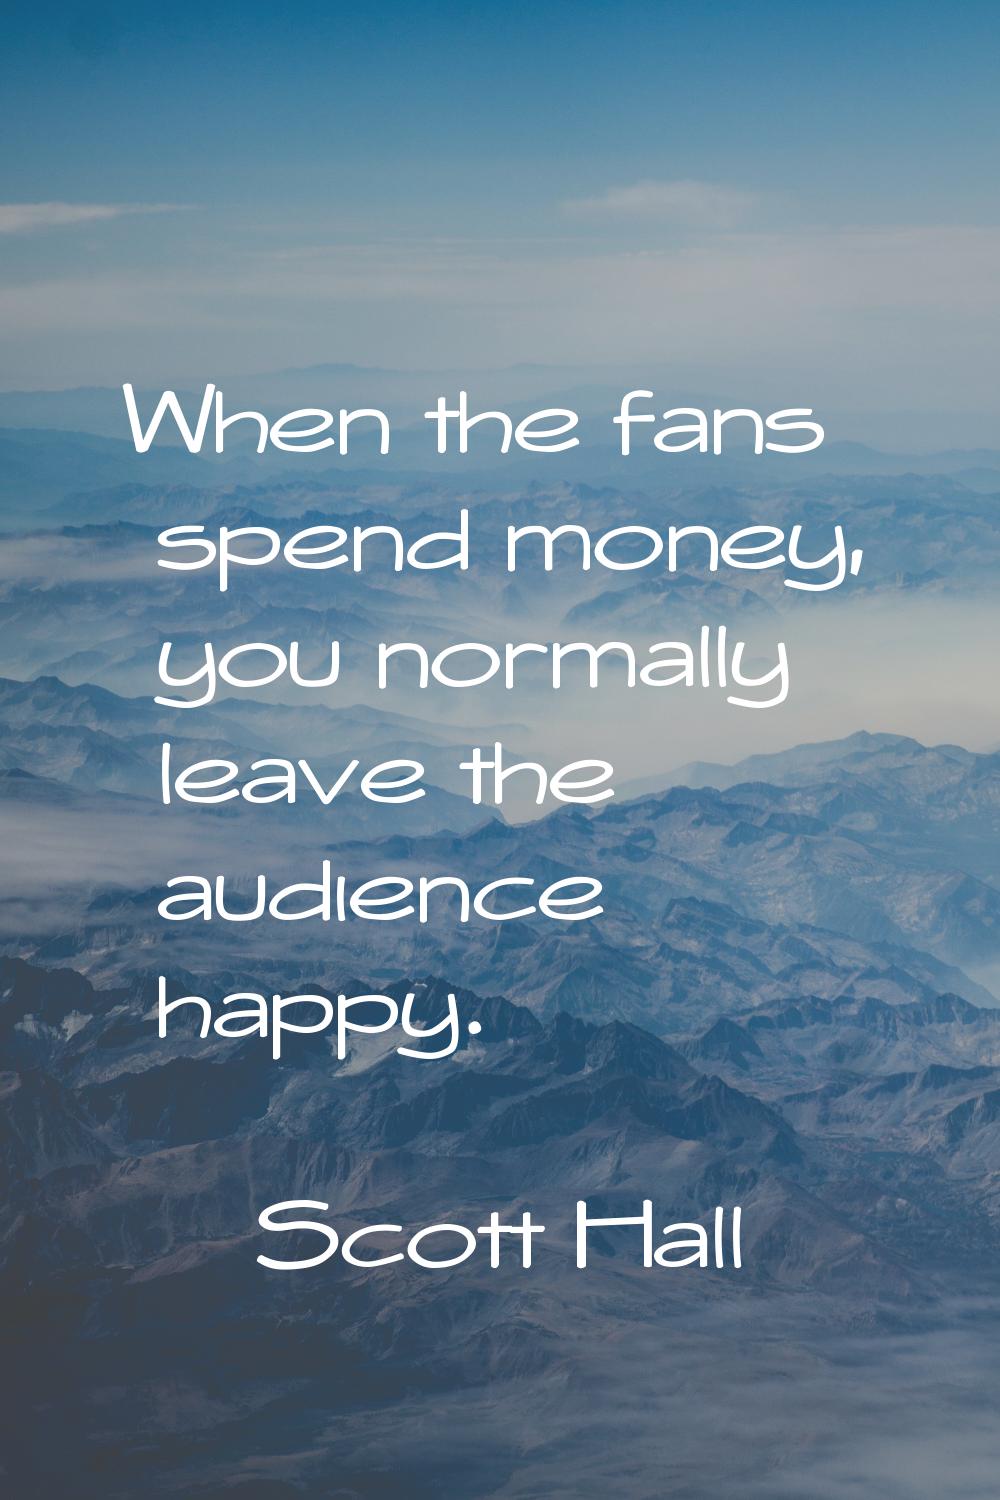 When the fans spend money, you normally leave the audience happy.